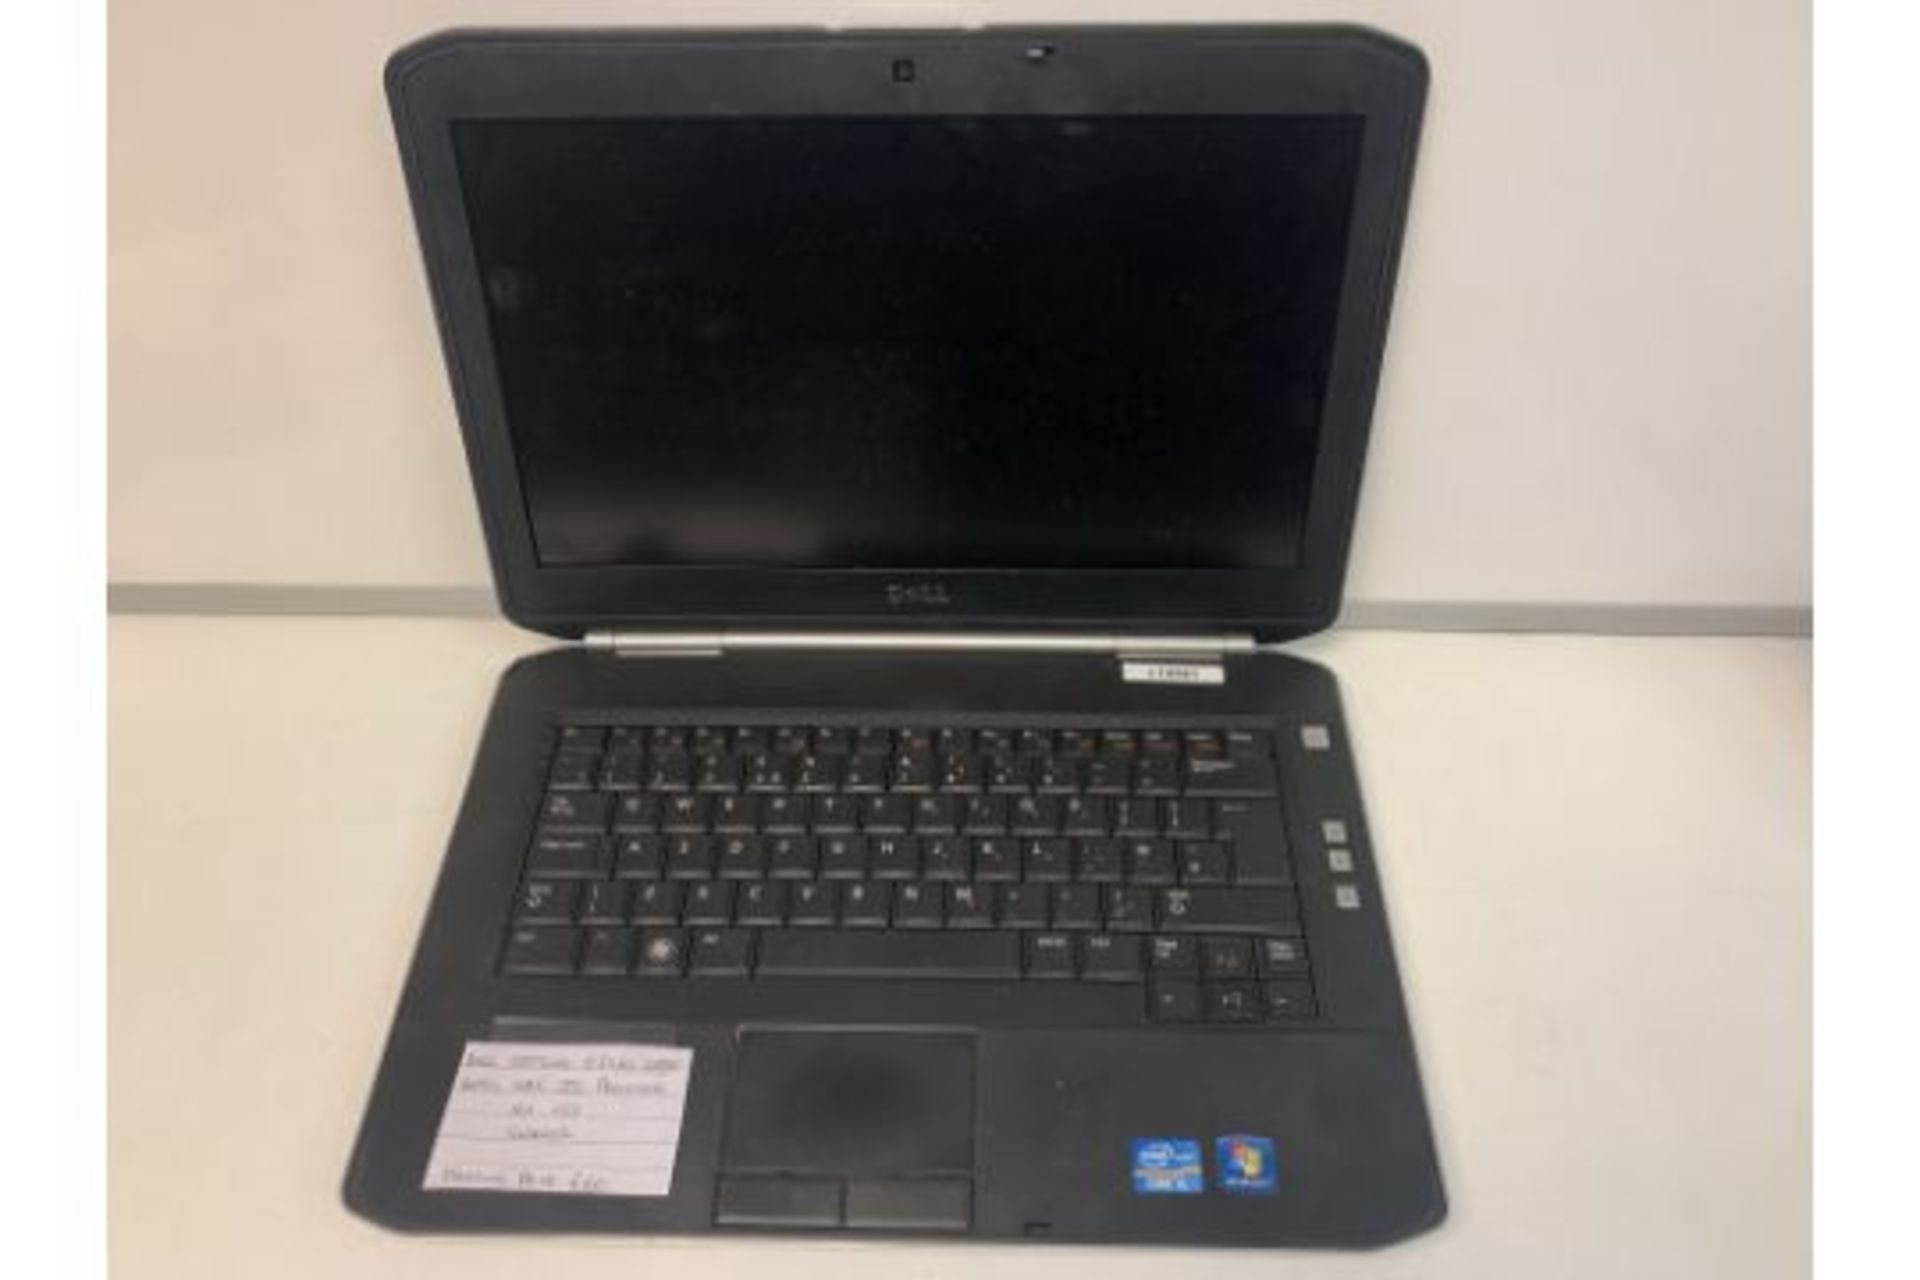 DELL LATTITUDE E5420 LAPTOP, INTEL CORE i5 PROCESSOR, NO OPERATING SYSTEM WITH CHARGER (98/25)